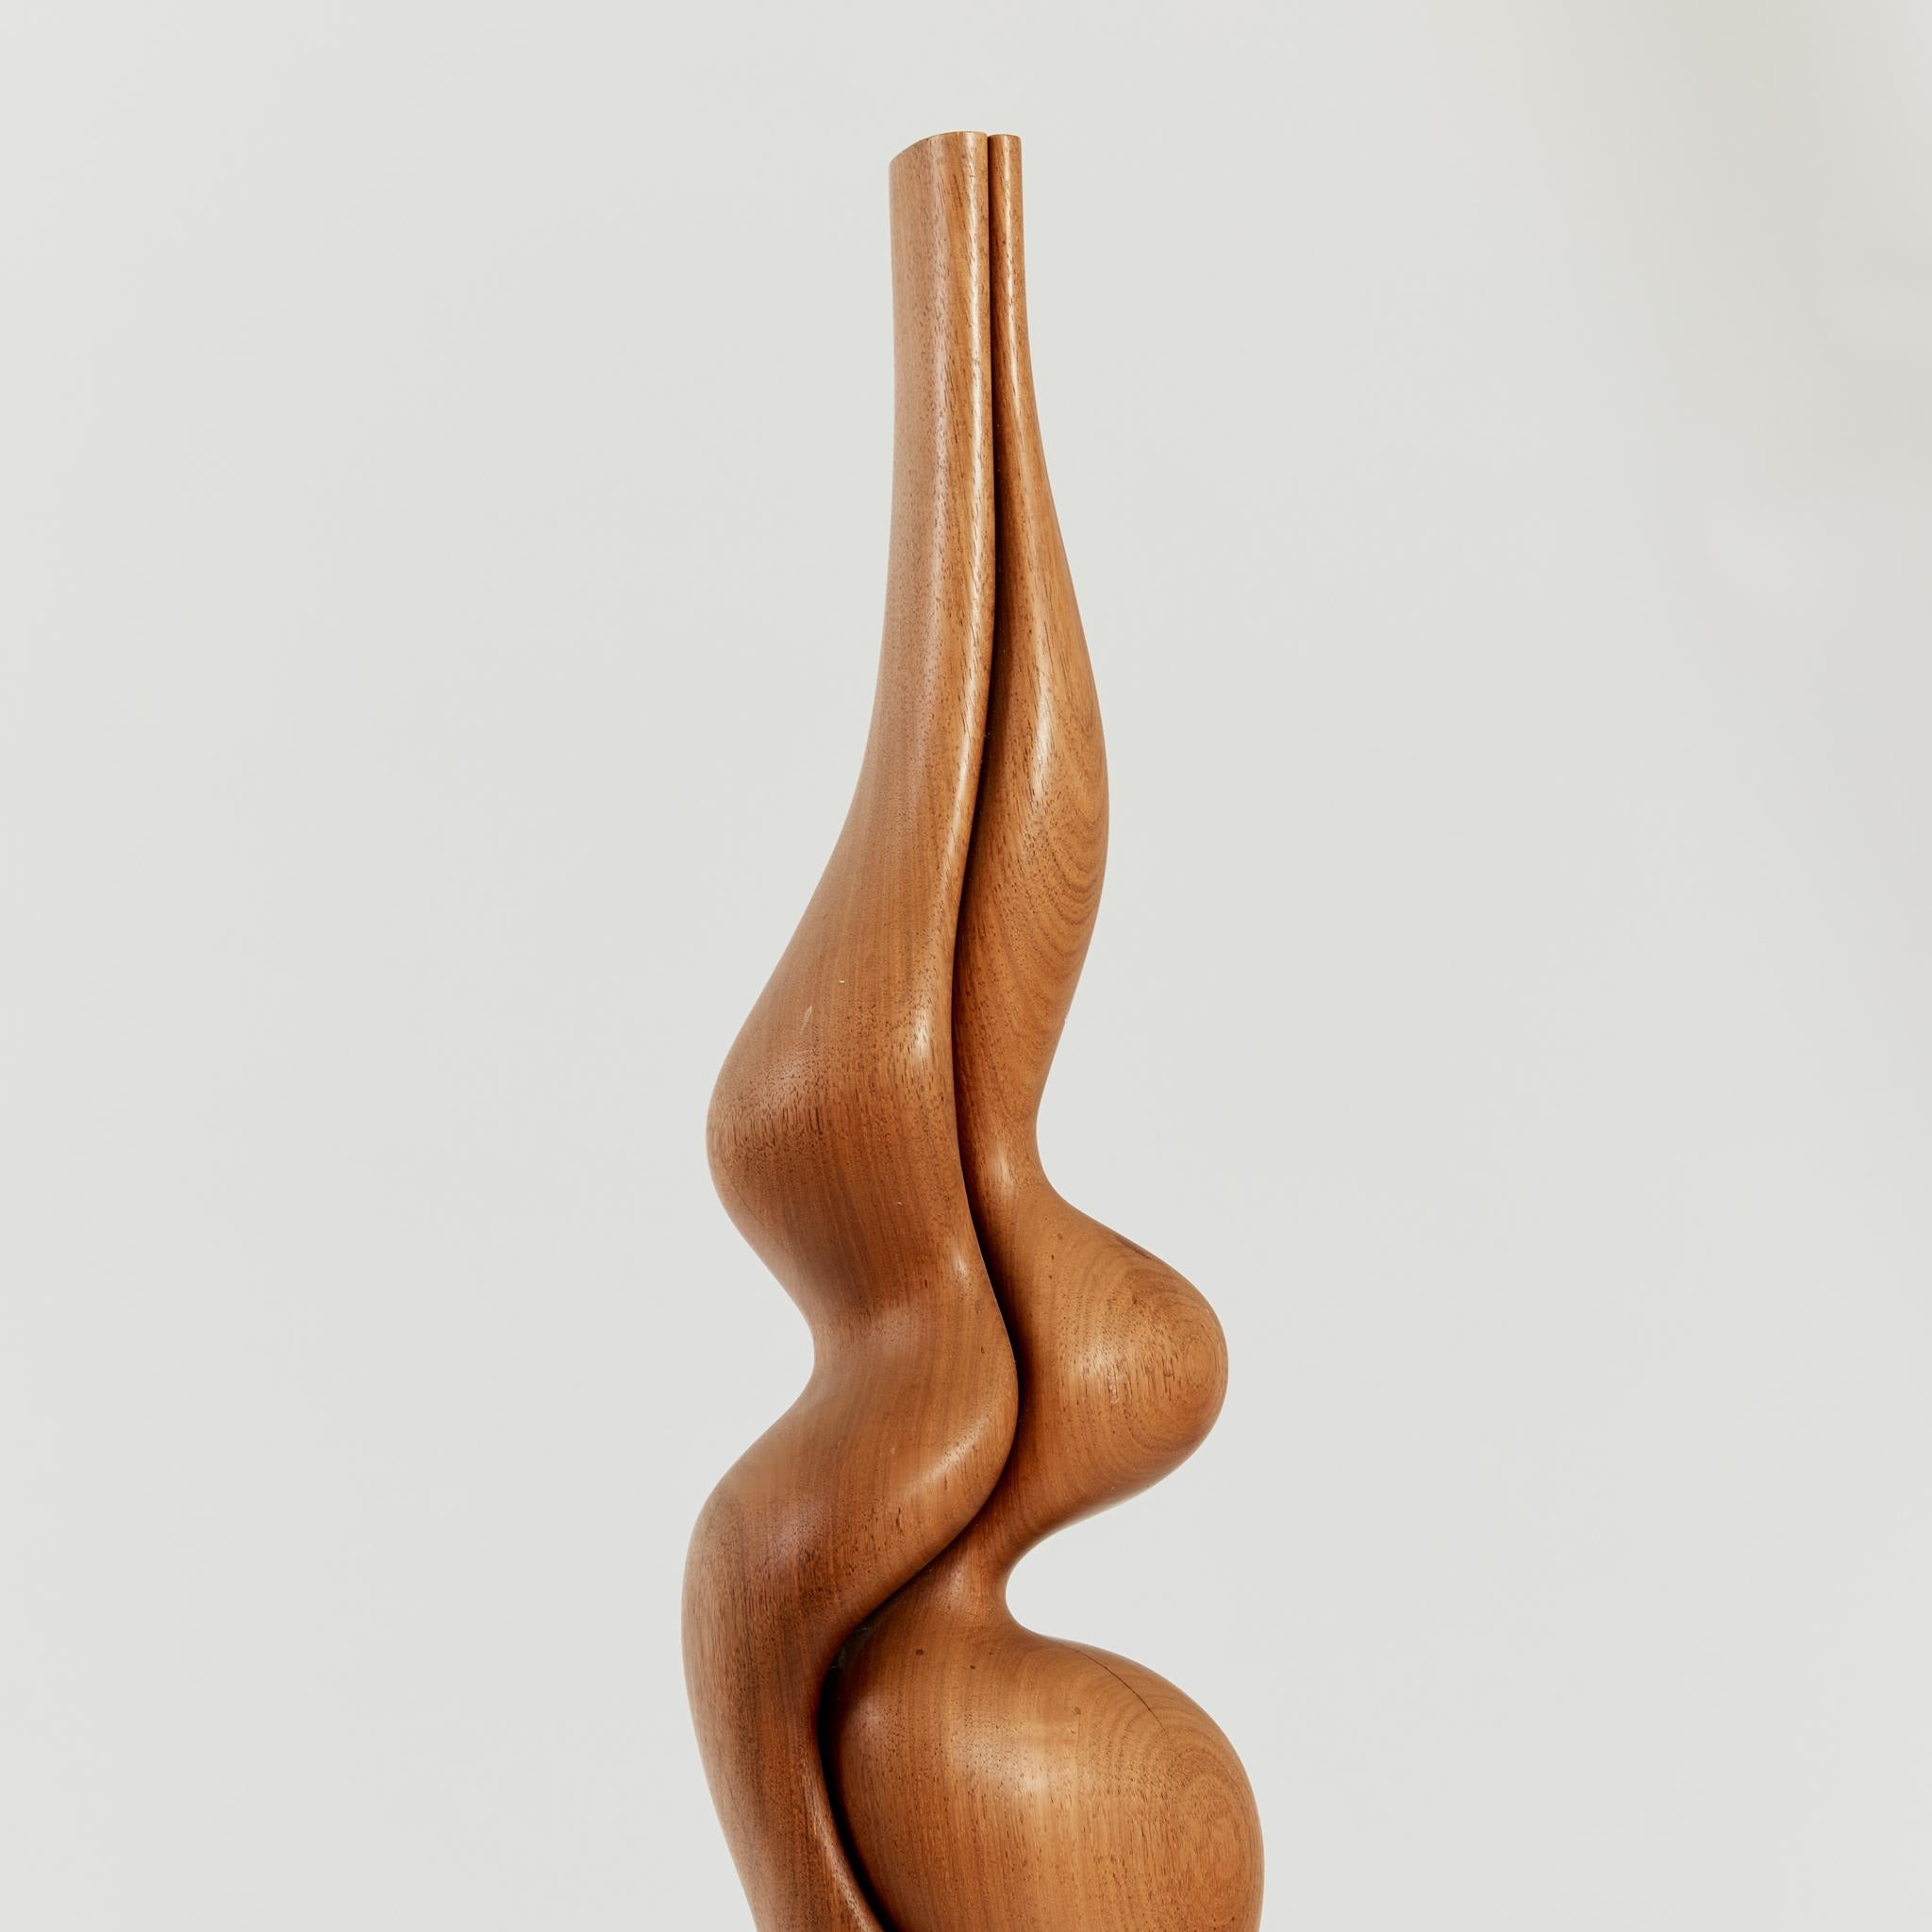 Tall Biomorphic Wood Floor Sculpture with Concrete Plinth 3